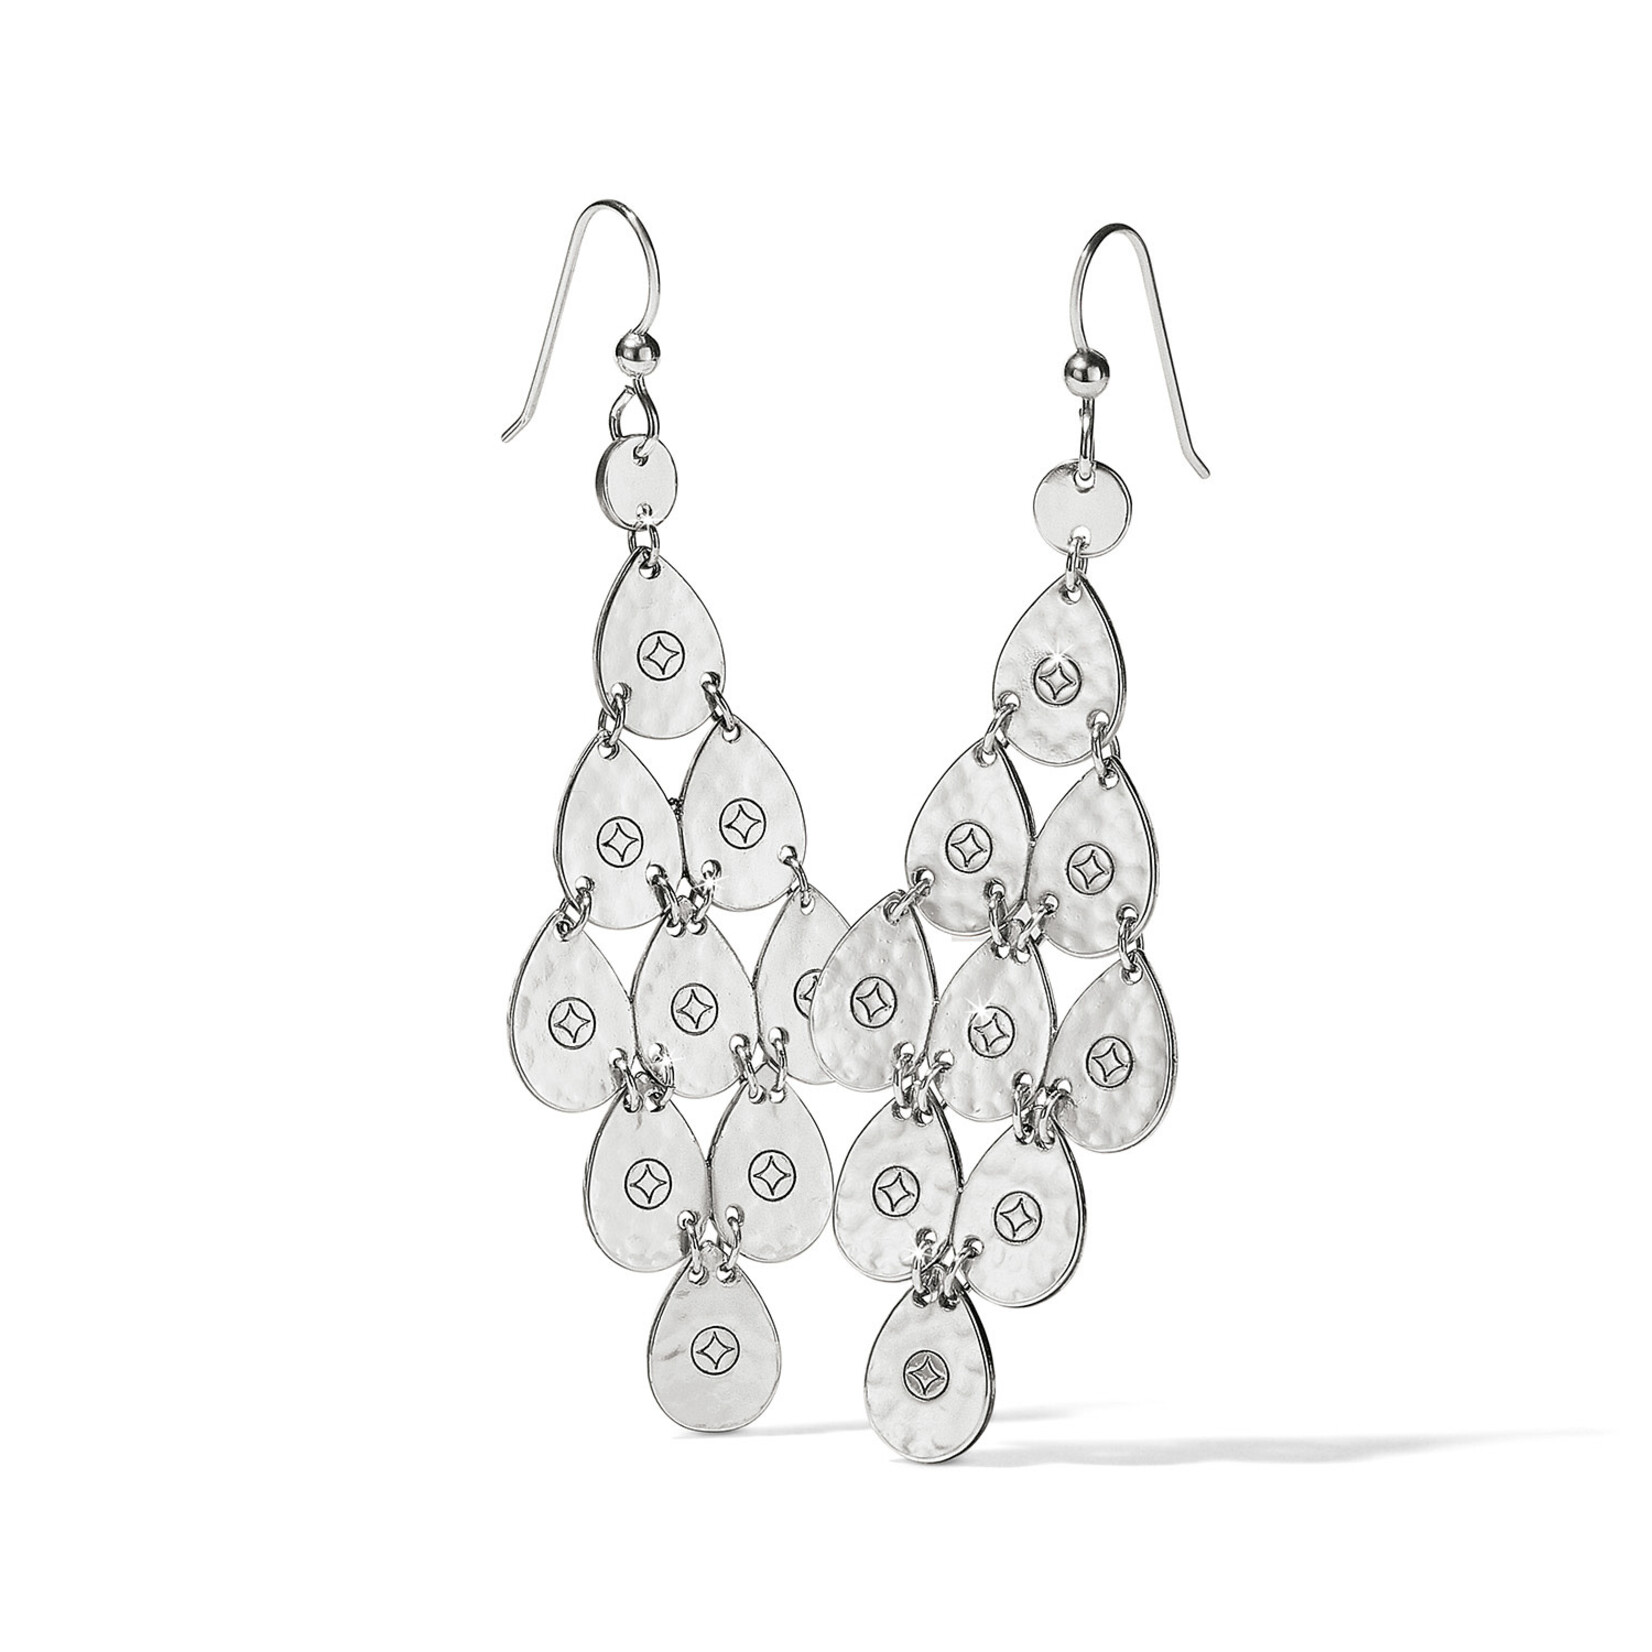 Brighton Palm Canyon Teardrop French Wire Earrings - Silver